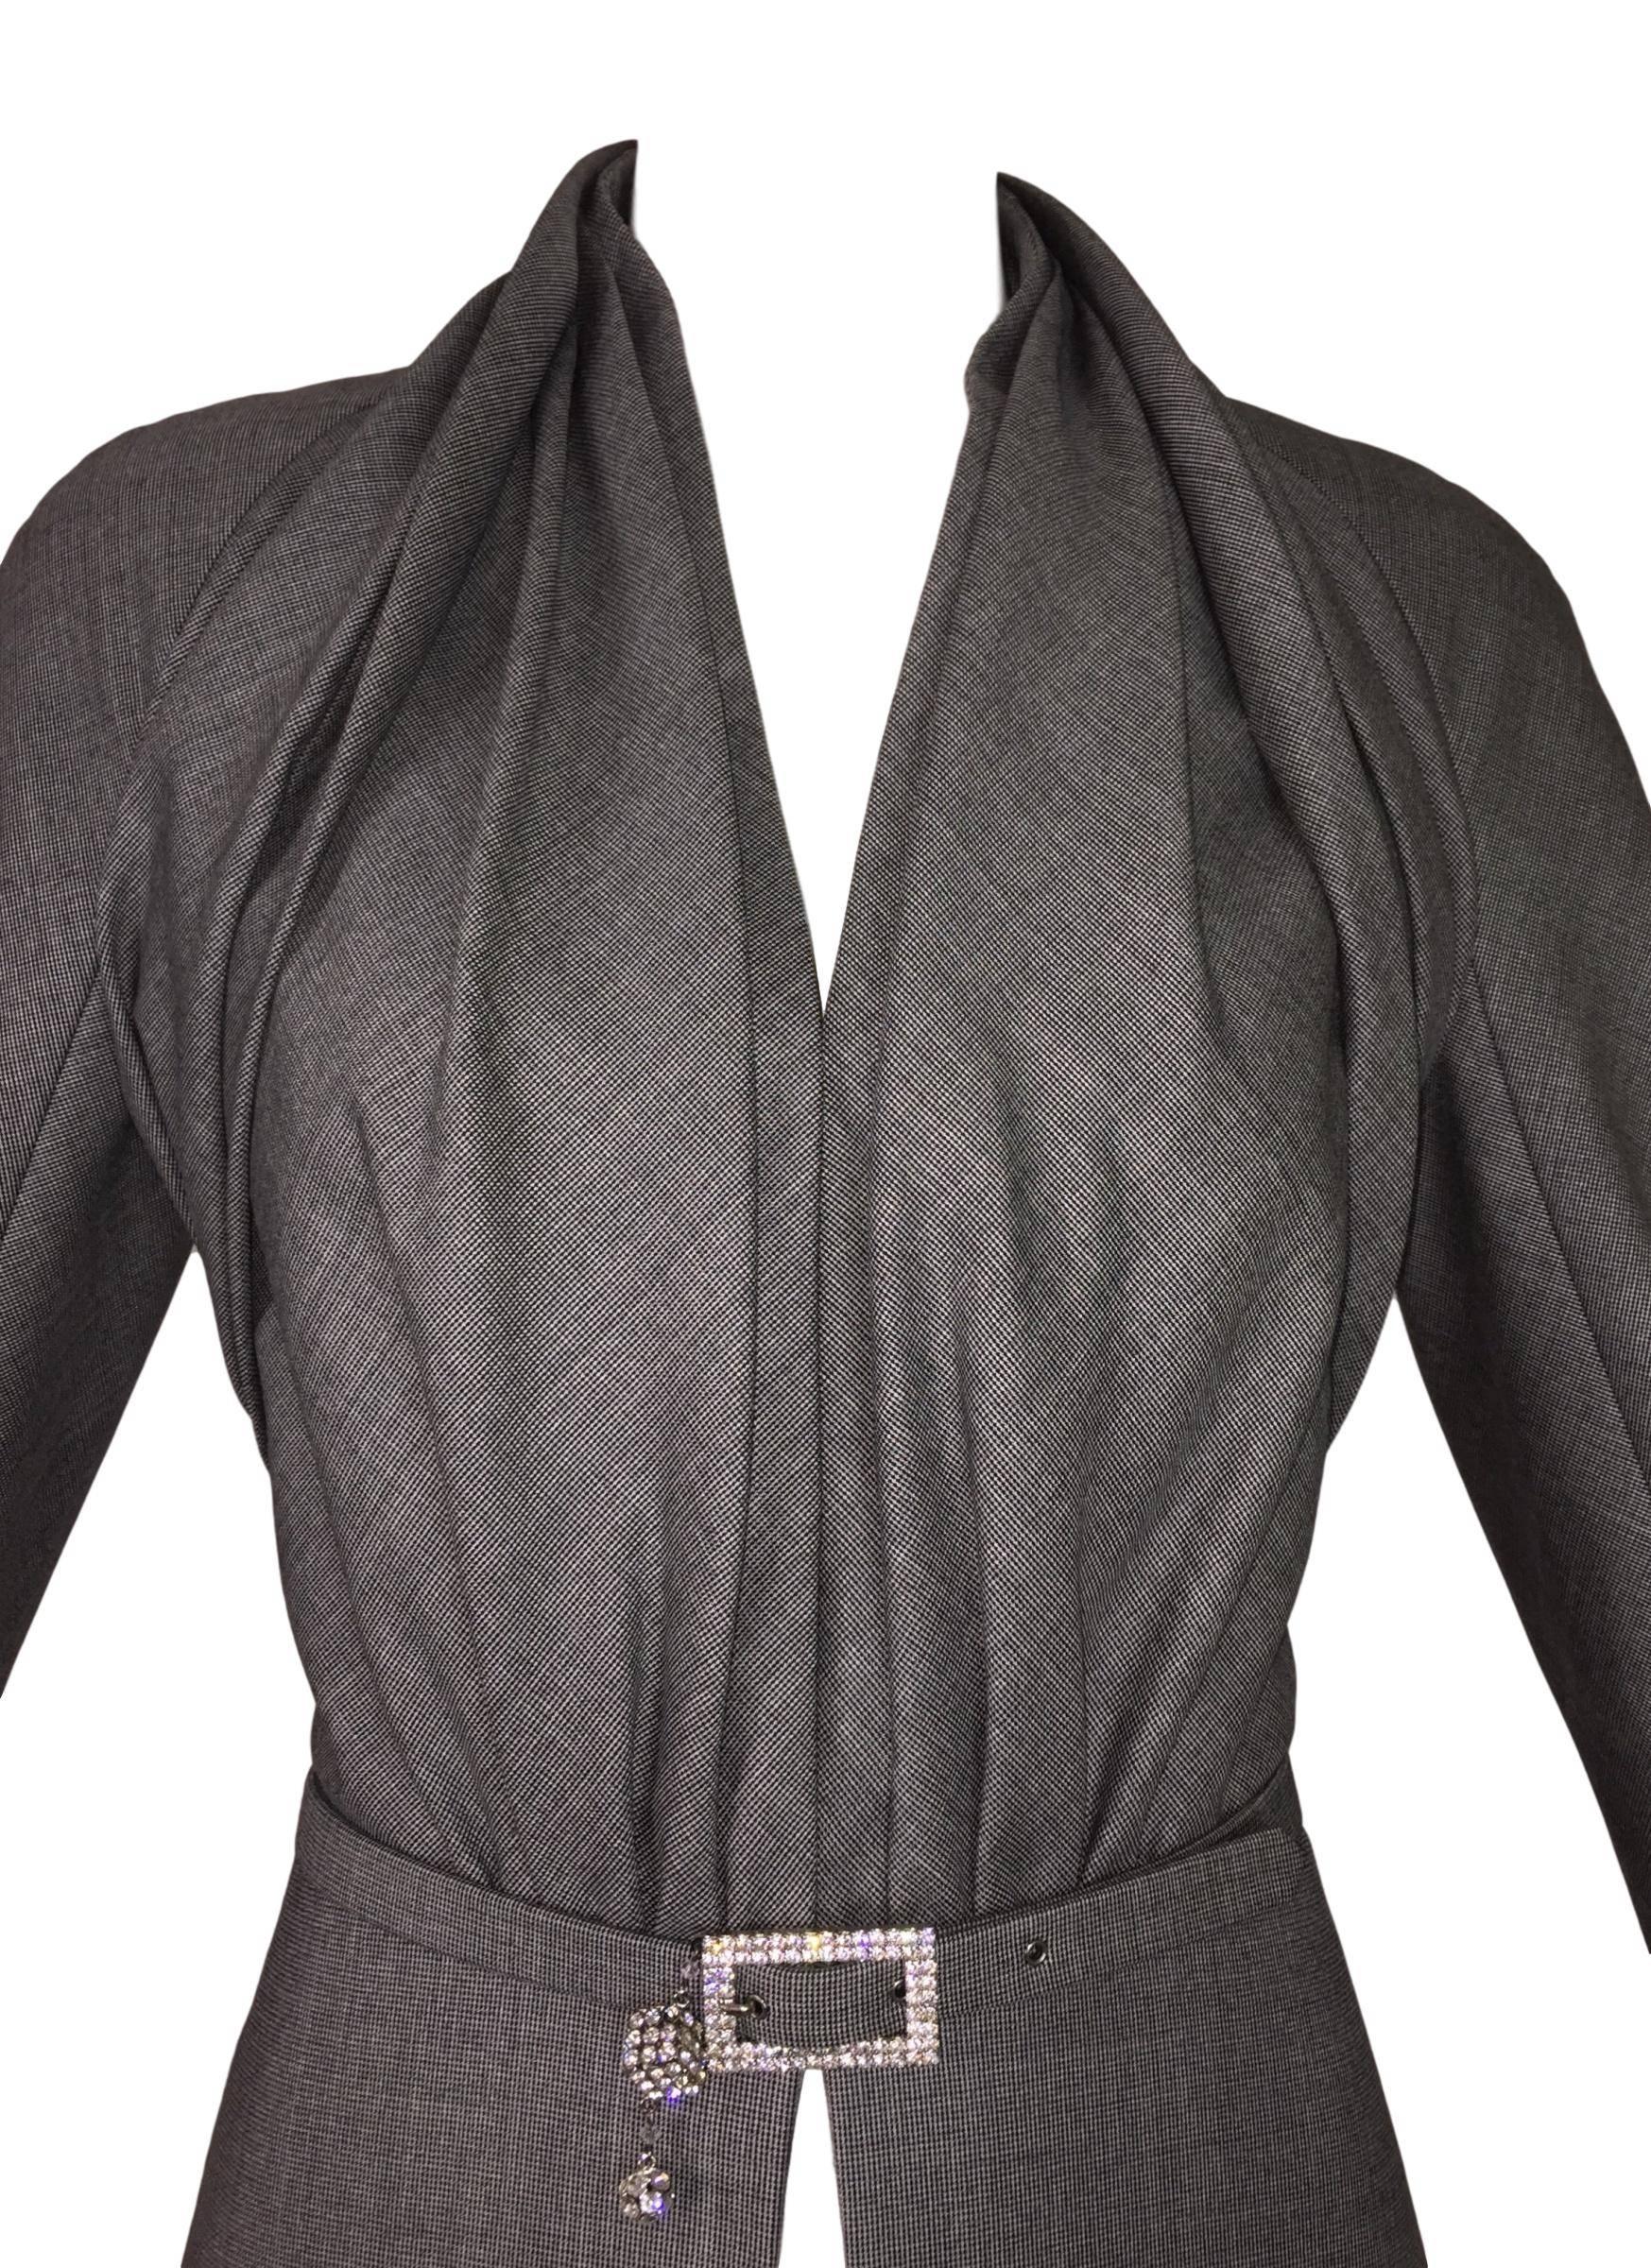 DESIGNER: S/S 2007 Christian Dior by John Galliano

Please contact for more information and/or photos.

CONDITION: Pristine! Possibly unworn

FABRIC: Wool lined in silk

COUNTRY MADE: France

SIZE: I-44, US-8, runs a little small

MEASUREMENTS;